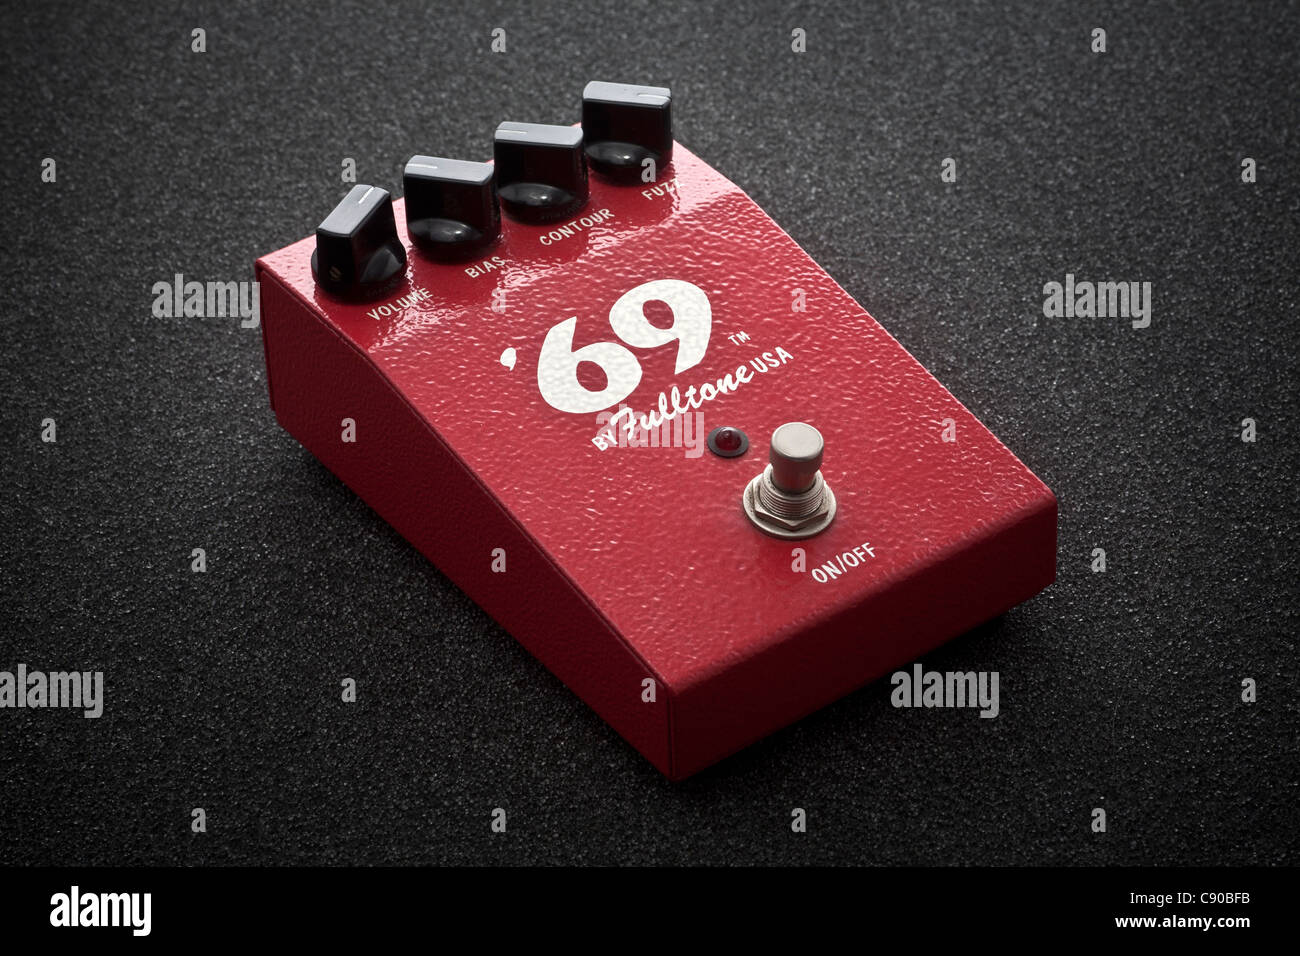 A FULLTONE 69 effect pedal photographed in the studio. It is an effect unit designed to be turned on and off with the feet. Stock Photo